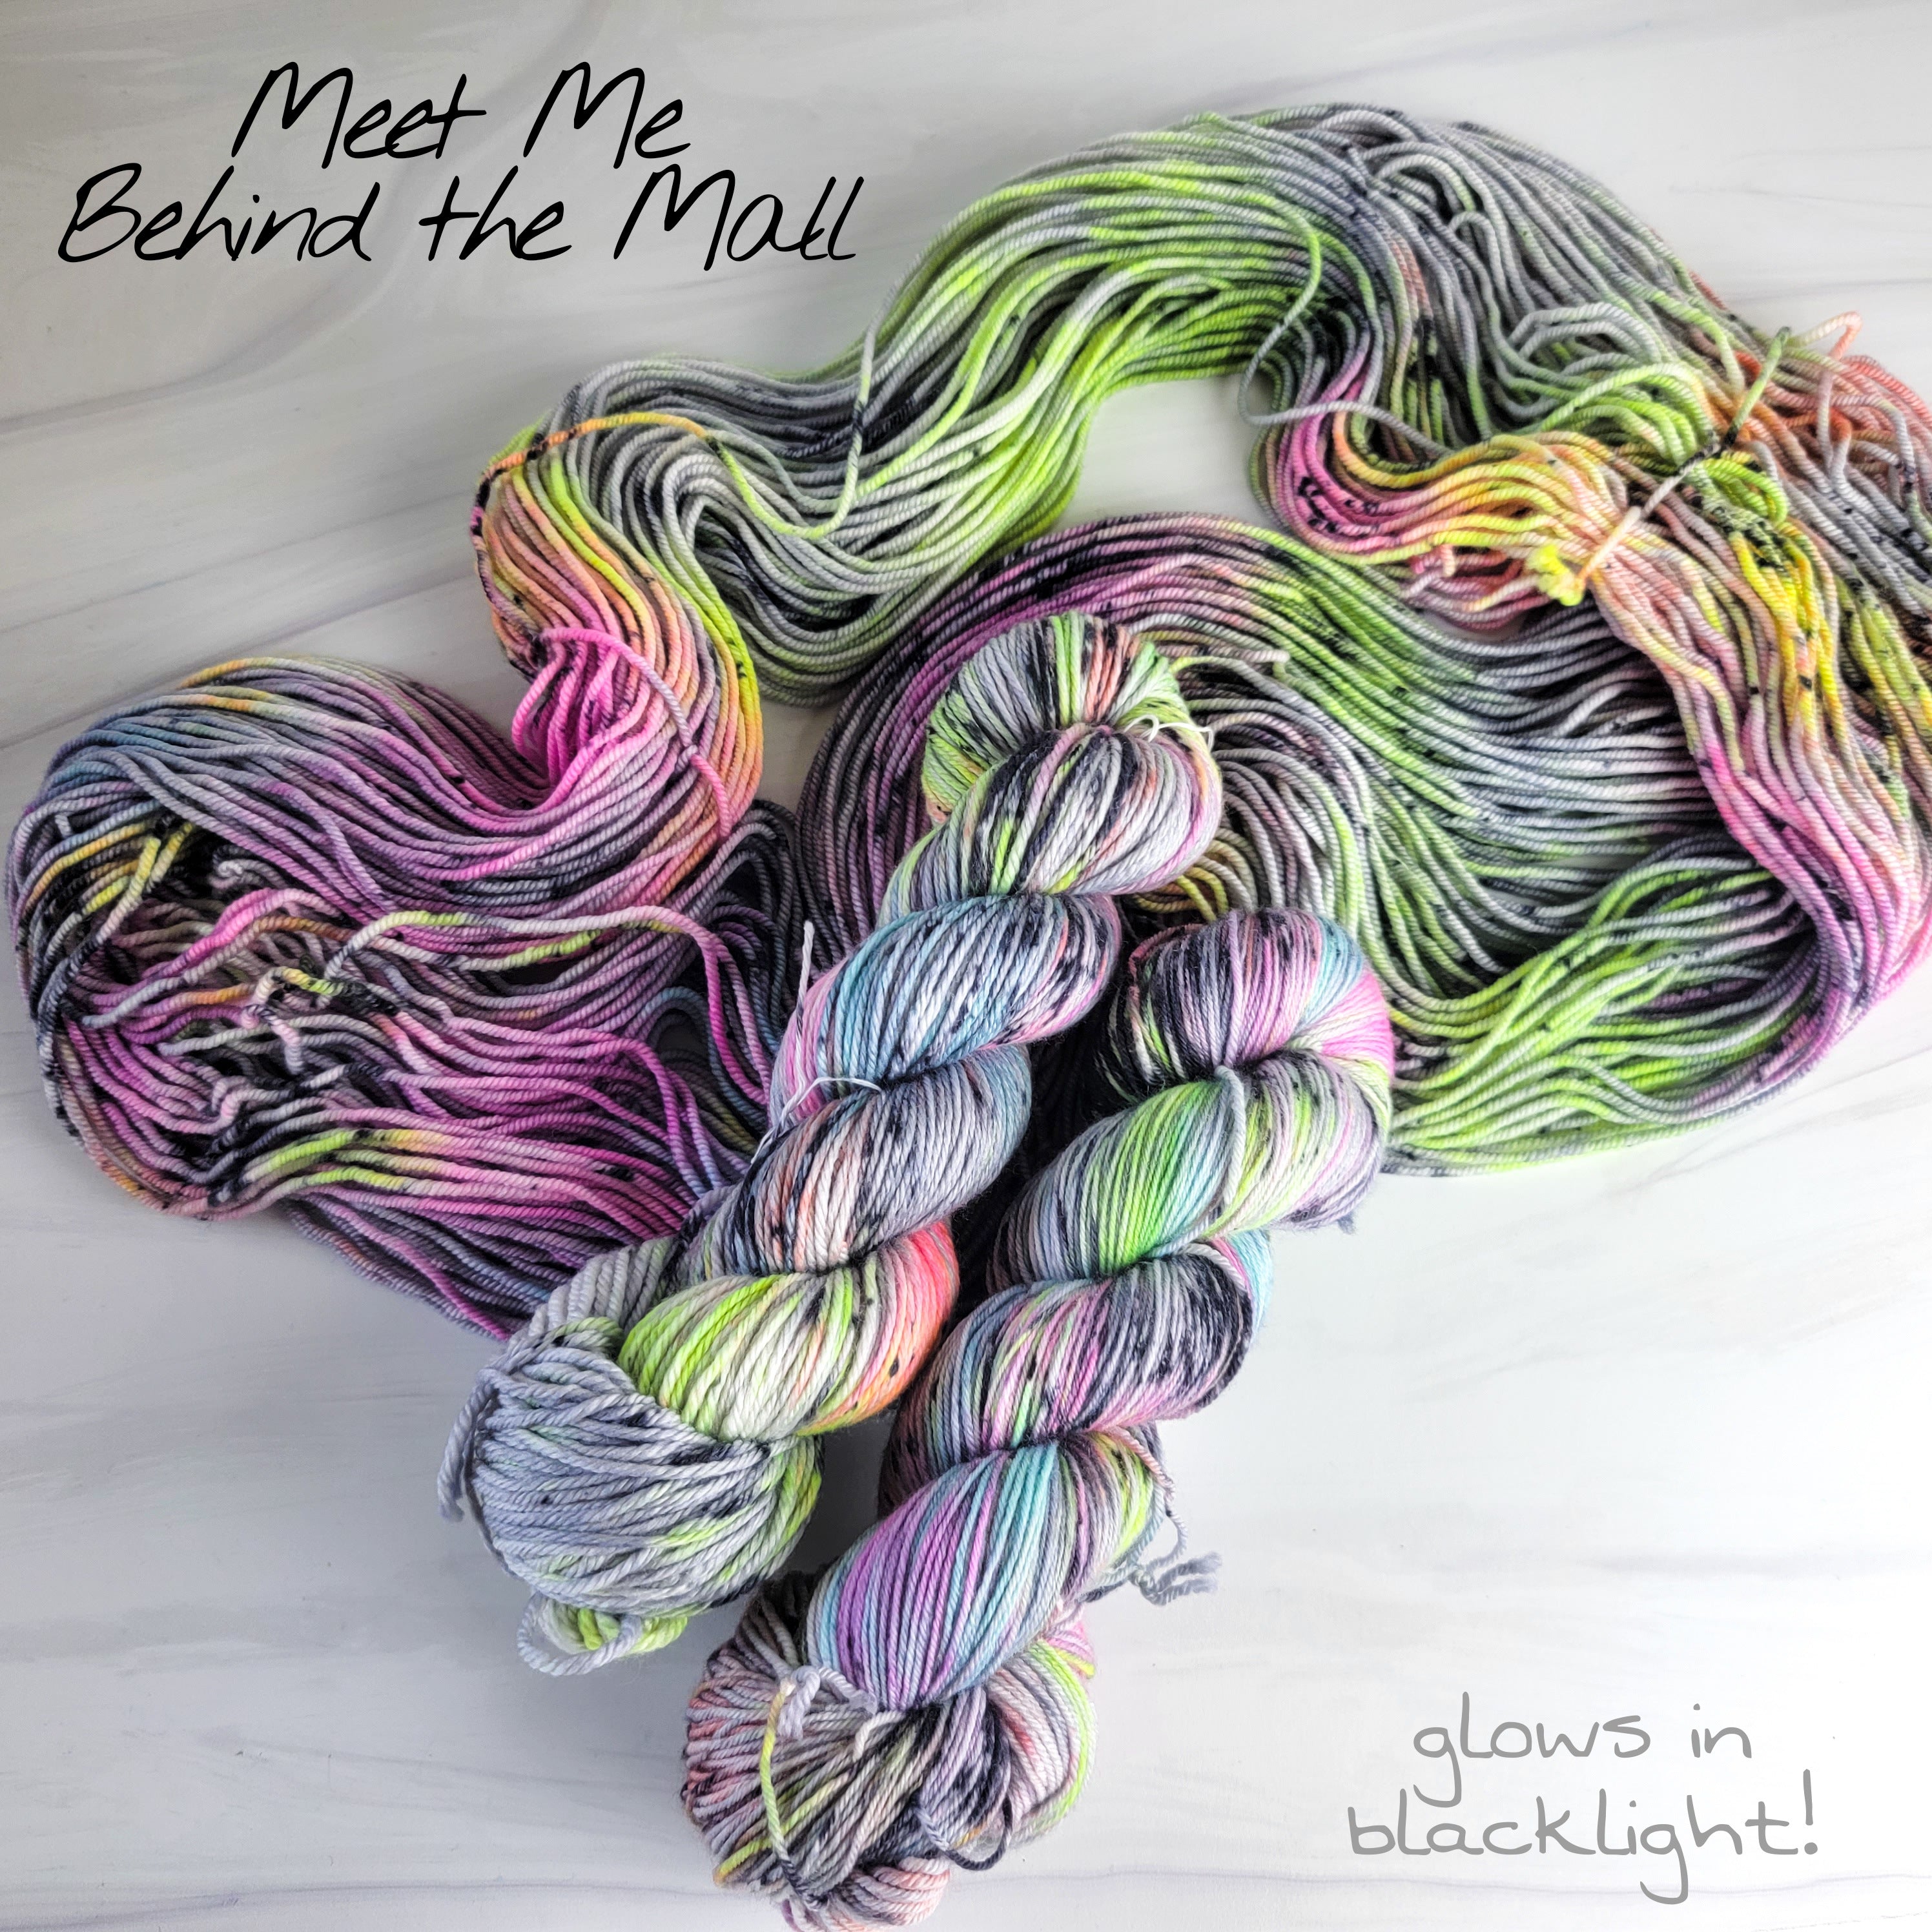 Everything Changed Me - Hand dyed Variegated yarn - Fingering to bulky